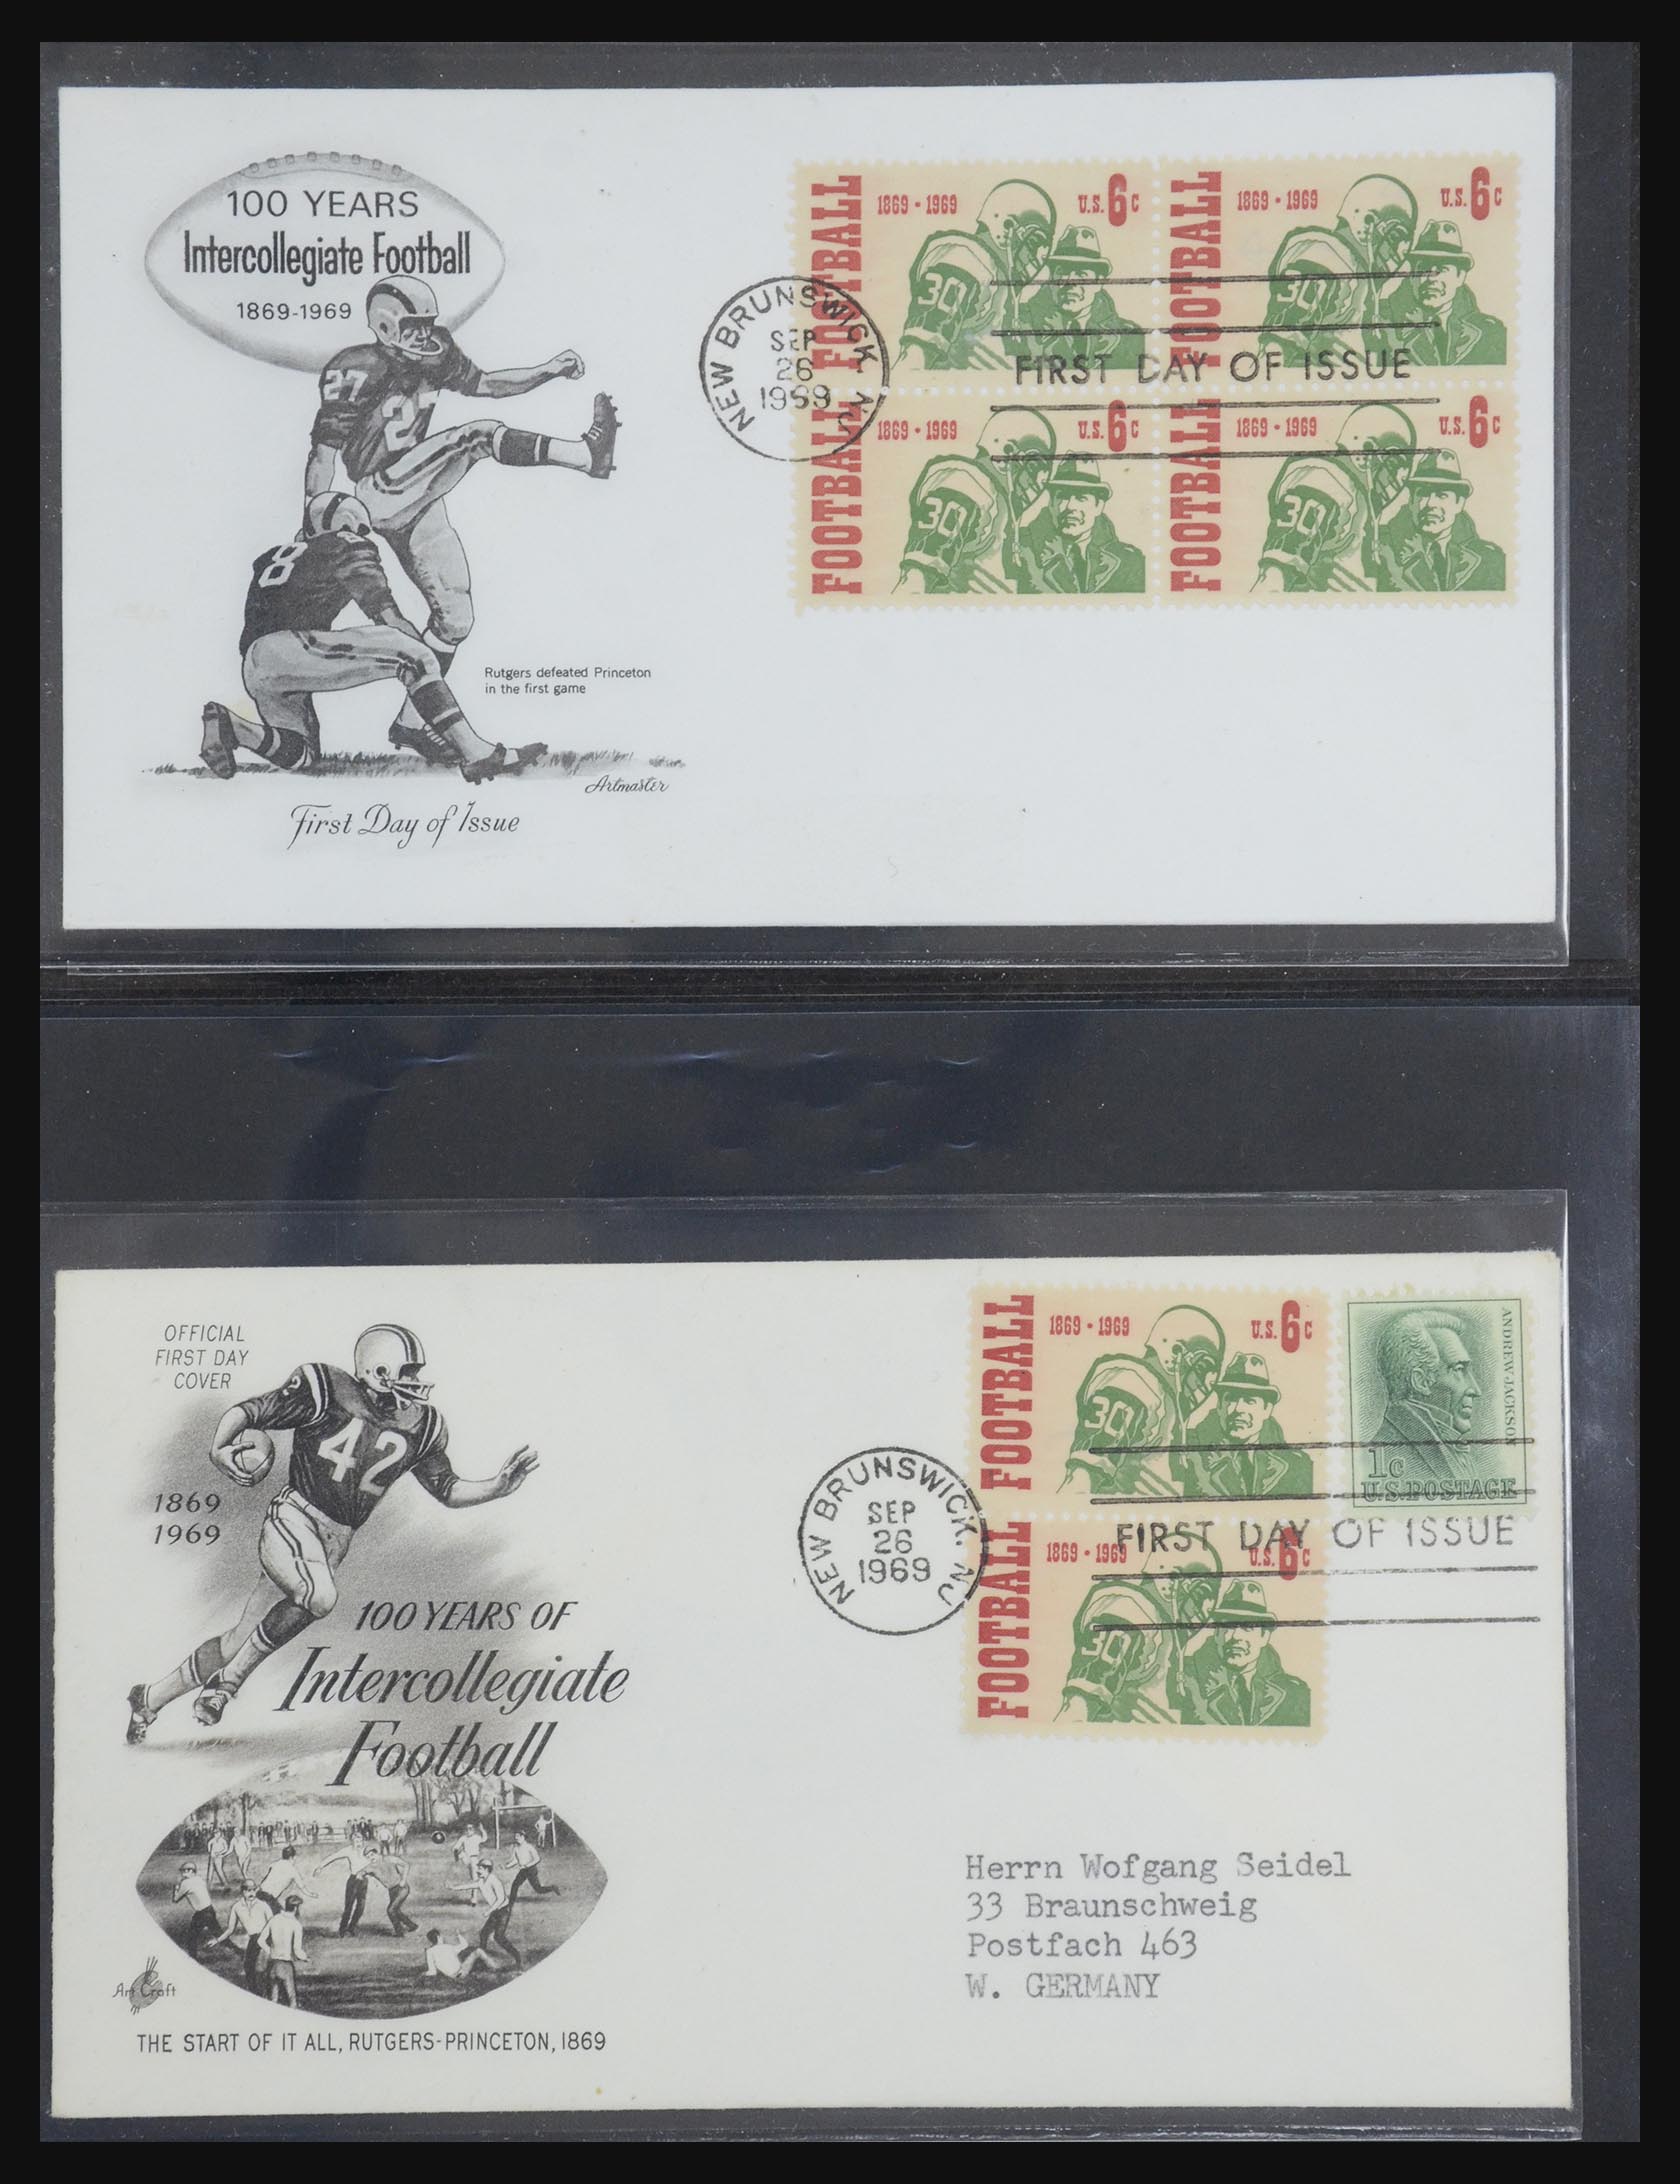 31913 0091 - 31913 USA first day cover collection 1945-1990.